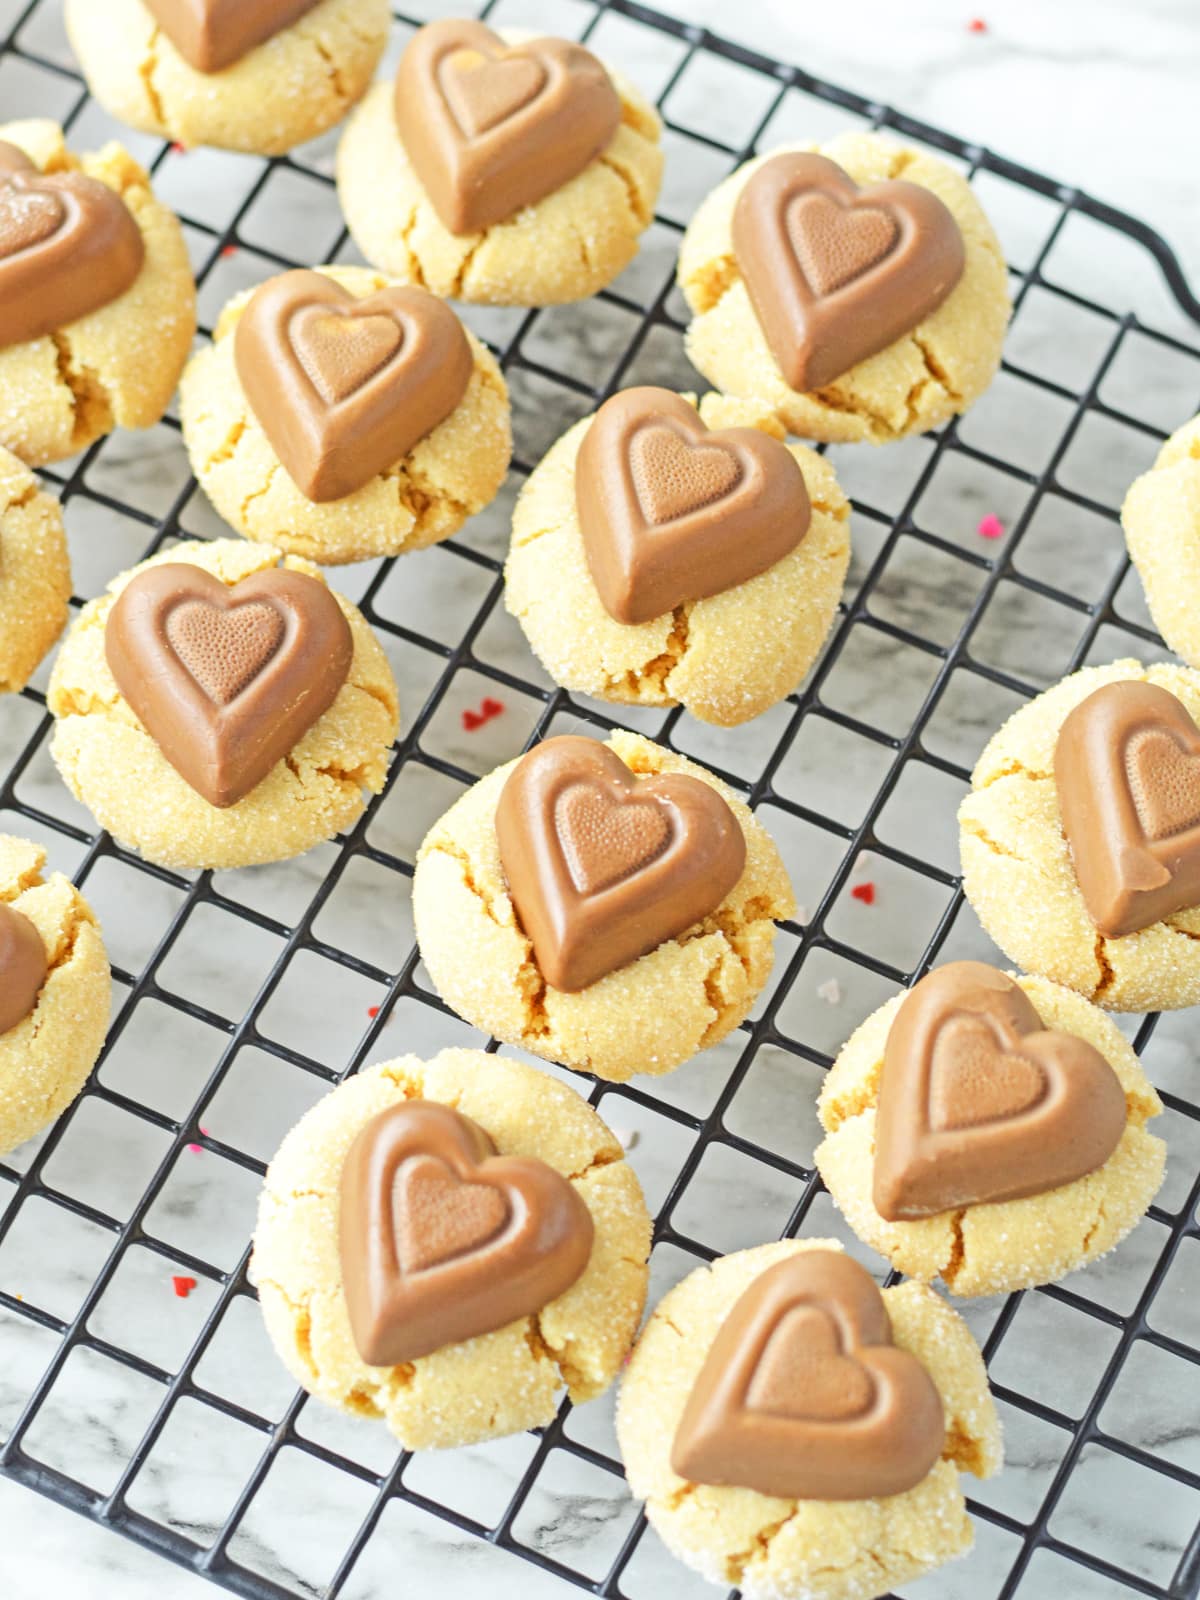 press chocolate peanut butter hearts into warm cookies